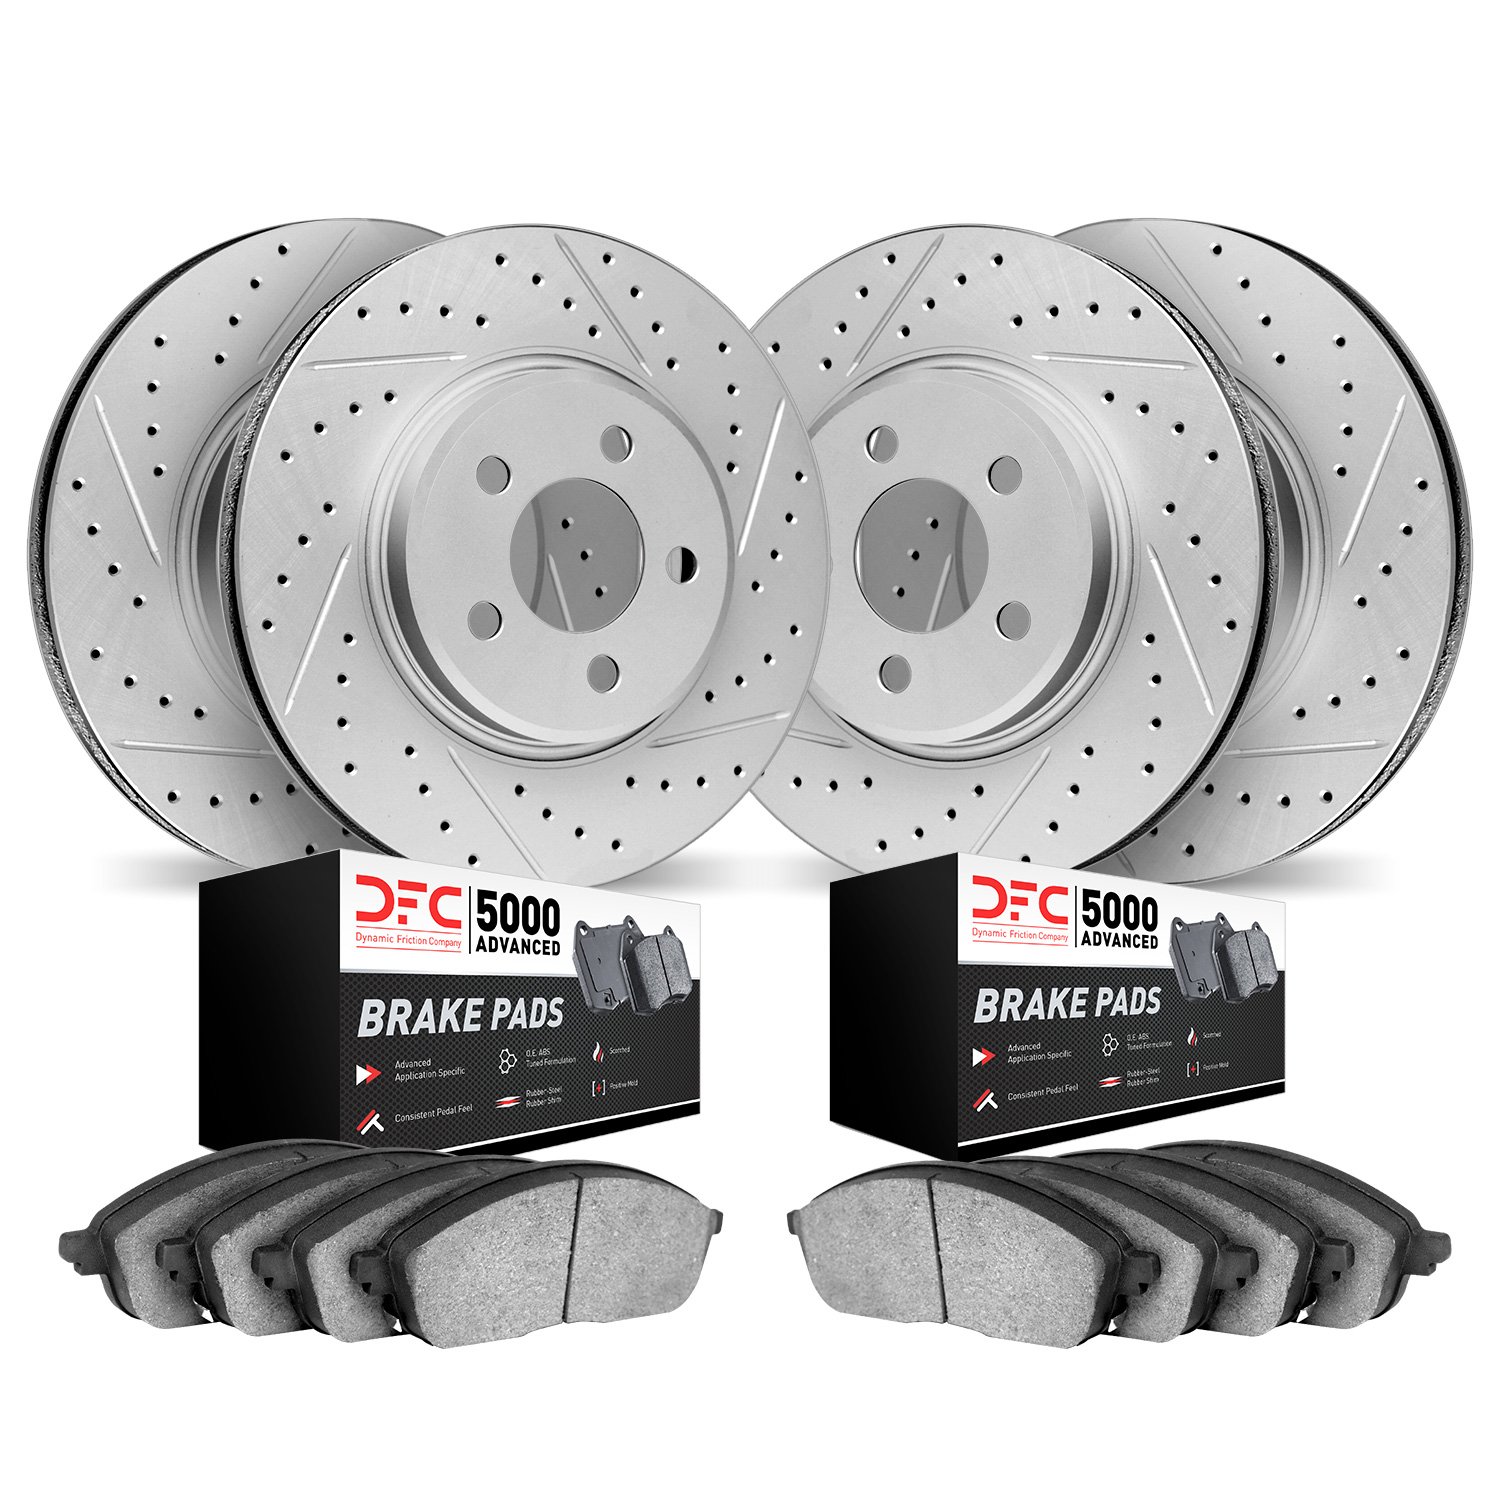 2504-16000 Geoperformance Drilled/Slotted Rotors w/5000 Advanced Brake Pads Kit, 2017-2021 Alfa Romeo, Position: Front and Rear